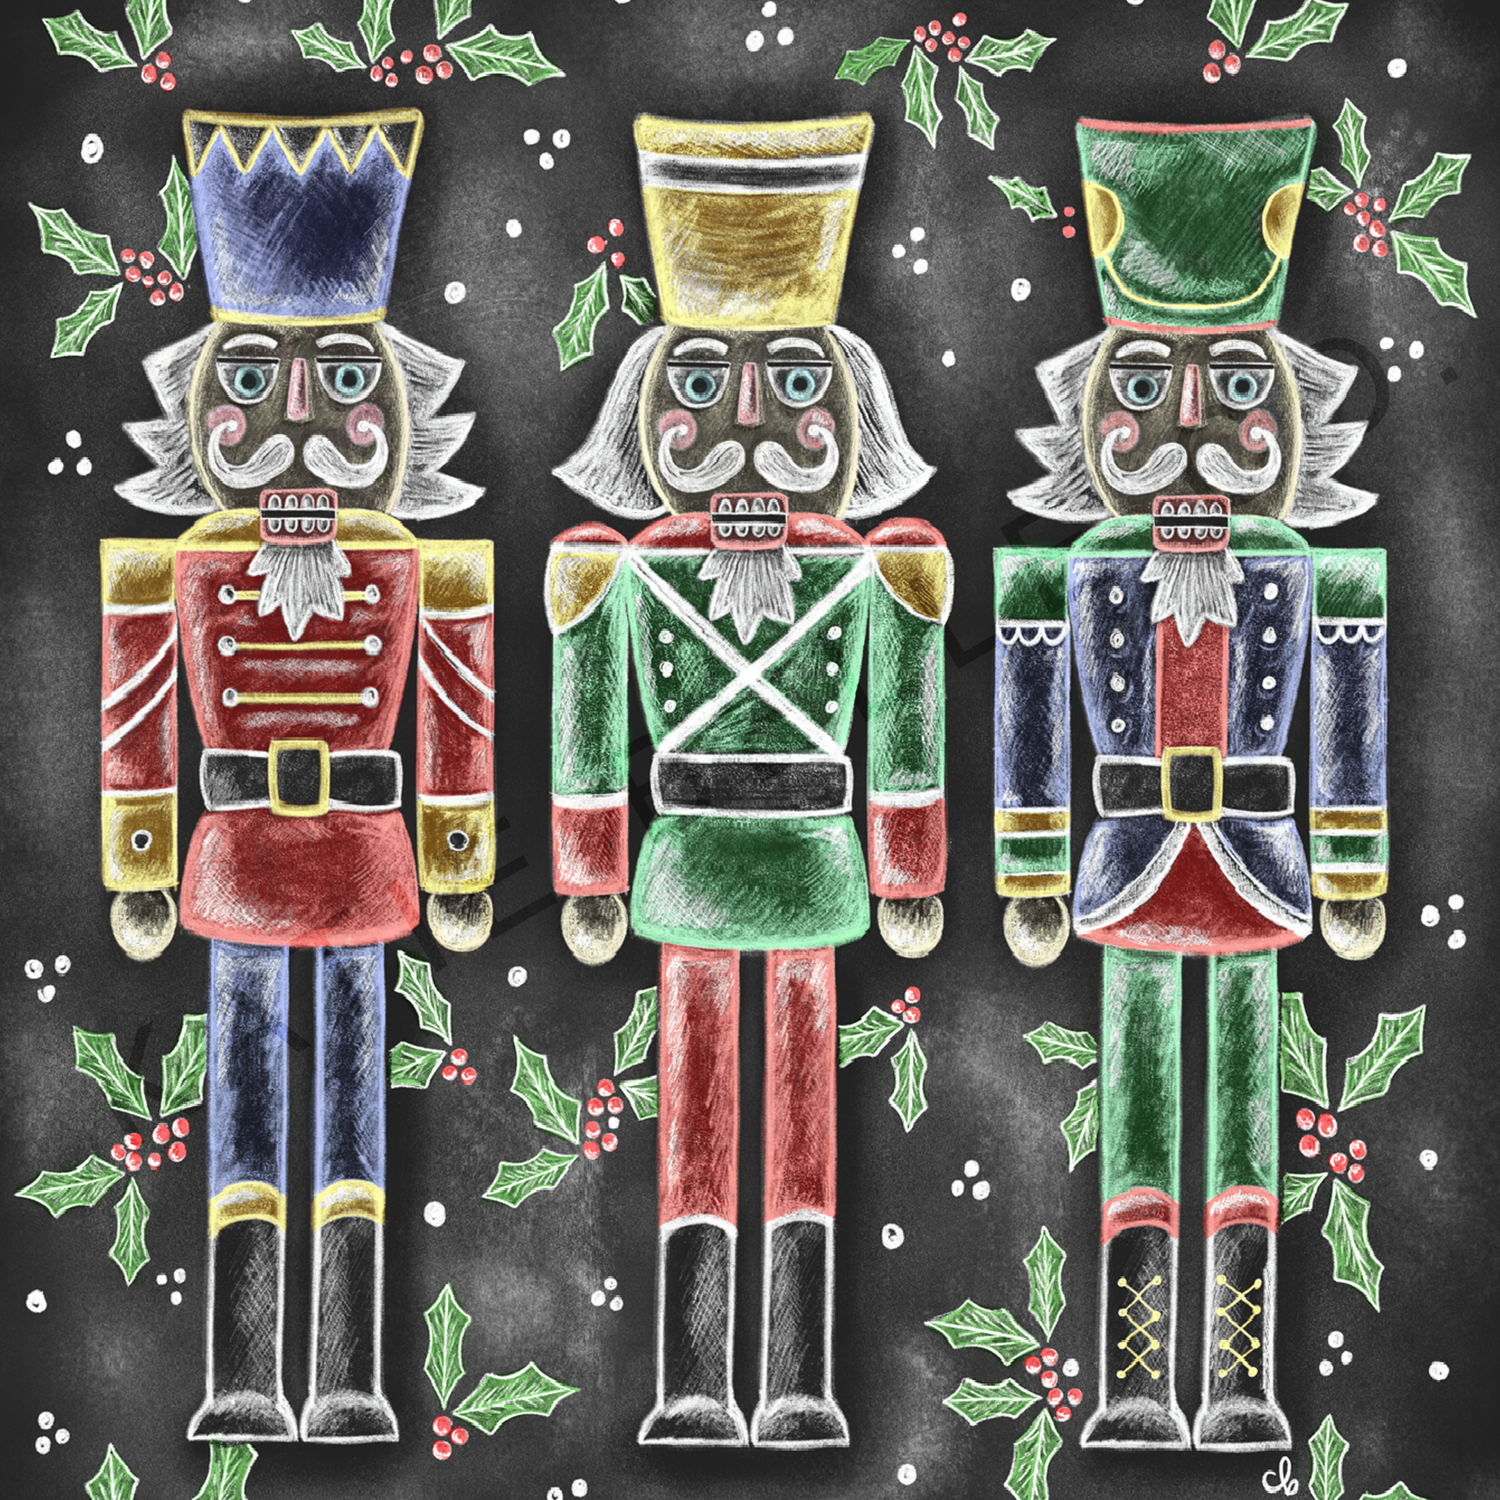 Merry Christmas. Merry Christmas Nutcrackers. 3 Nutcrackers. Holly leaves and berries accent. Christmas Decor. Holiday Decor. Holiday Art. Chalkboard Print. Chalk Art. Classic Christmas colors. 8 x 10 print. 5 x 7 print. unframed art. katie belle co